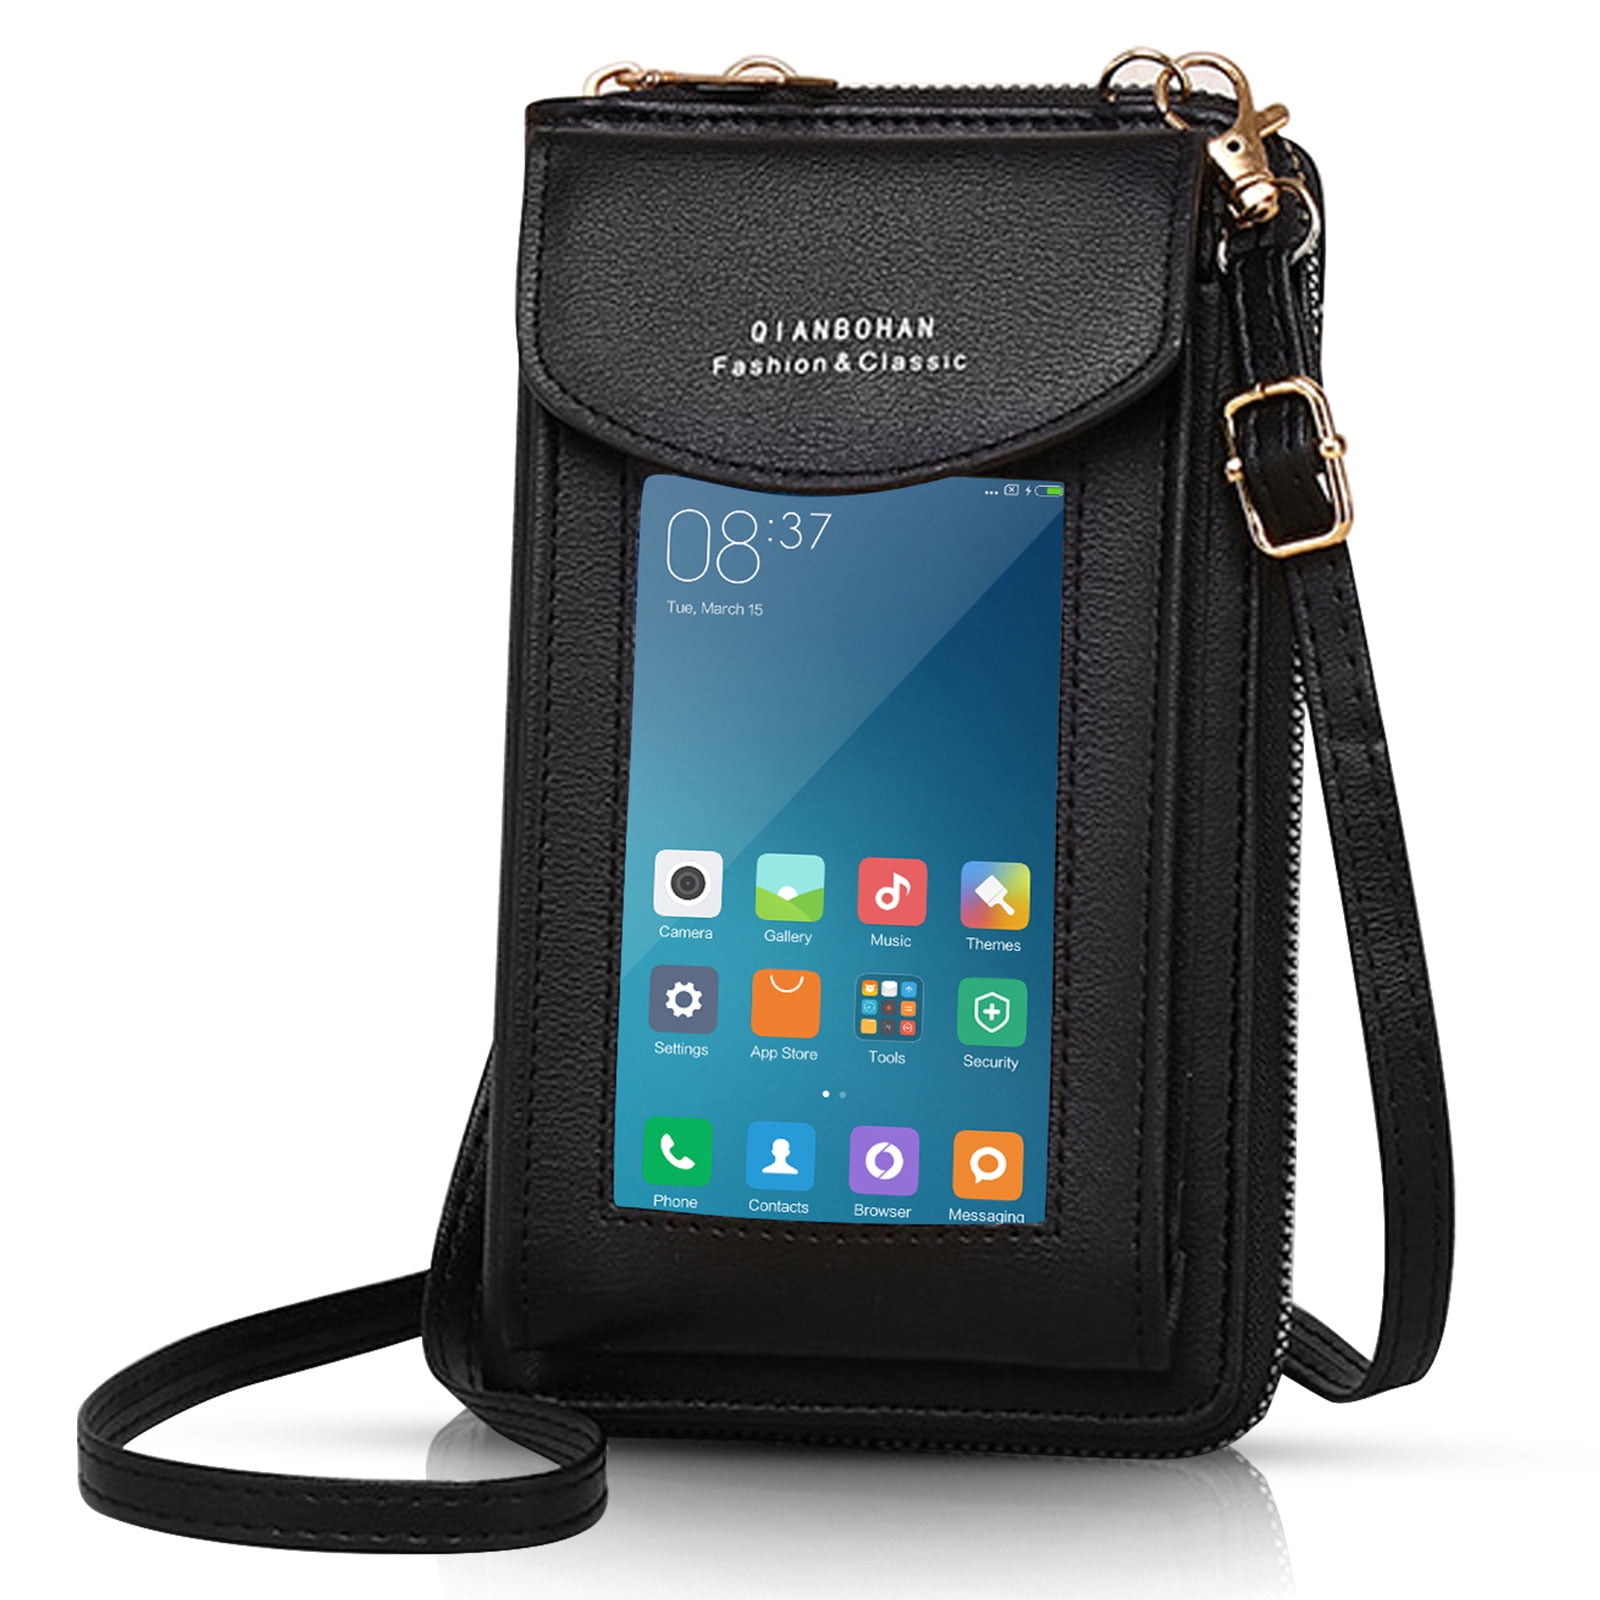 Small Crossbody Cell Phone Bag, TSV Leather Shoulder Phone Purse Pouch with  Touch Screen and Card Slots for Women, Black